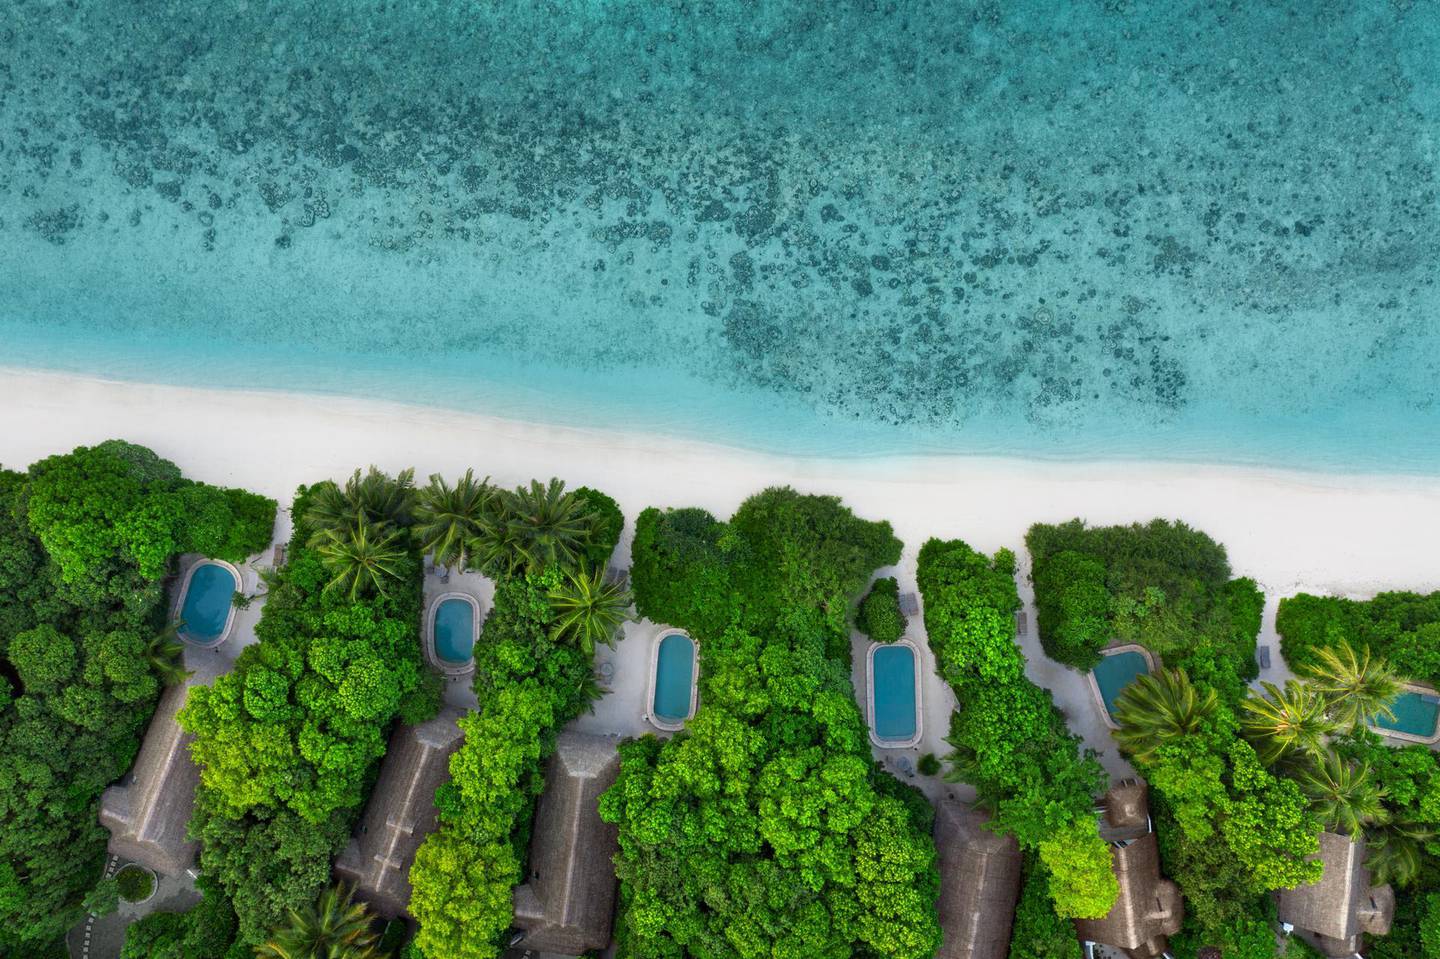 An aerial view of Soneva Fushi, which is one of the Maldives's oldest and most luxurious resorts